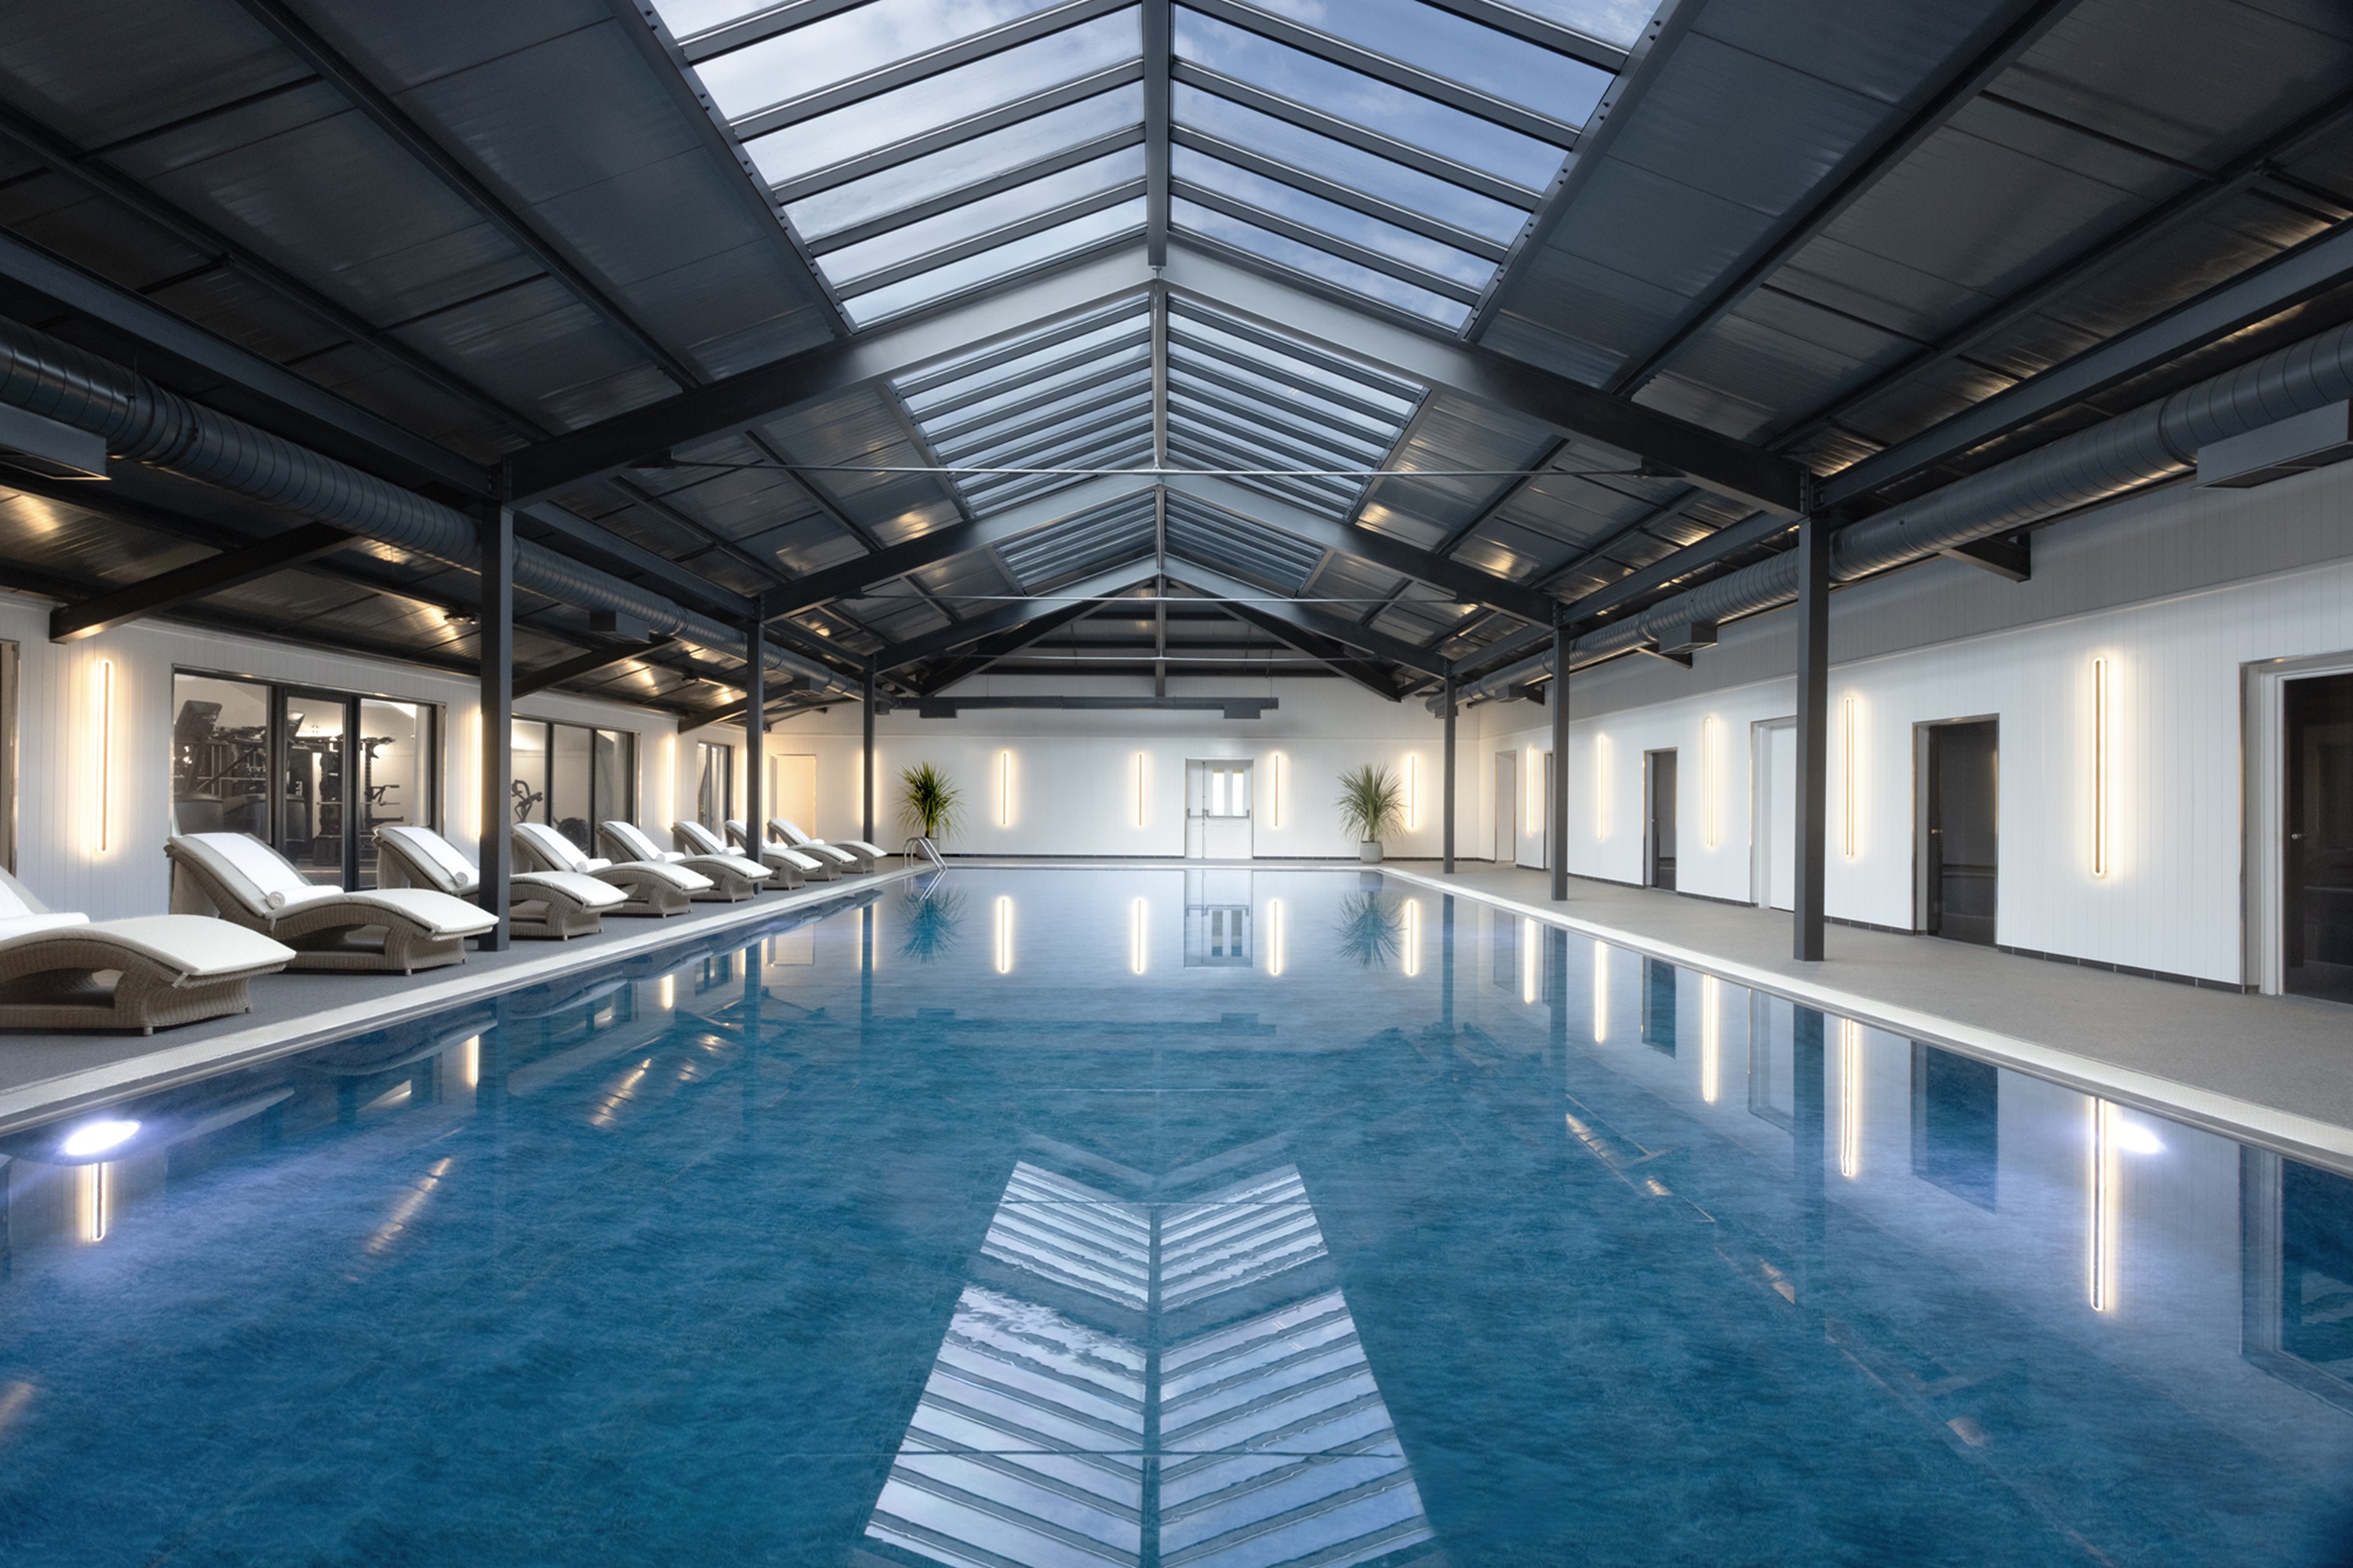 New spa and leisure facilities open at Mar Hall